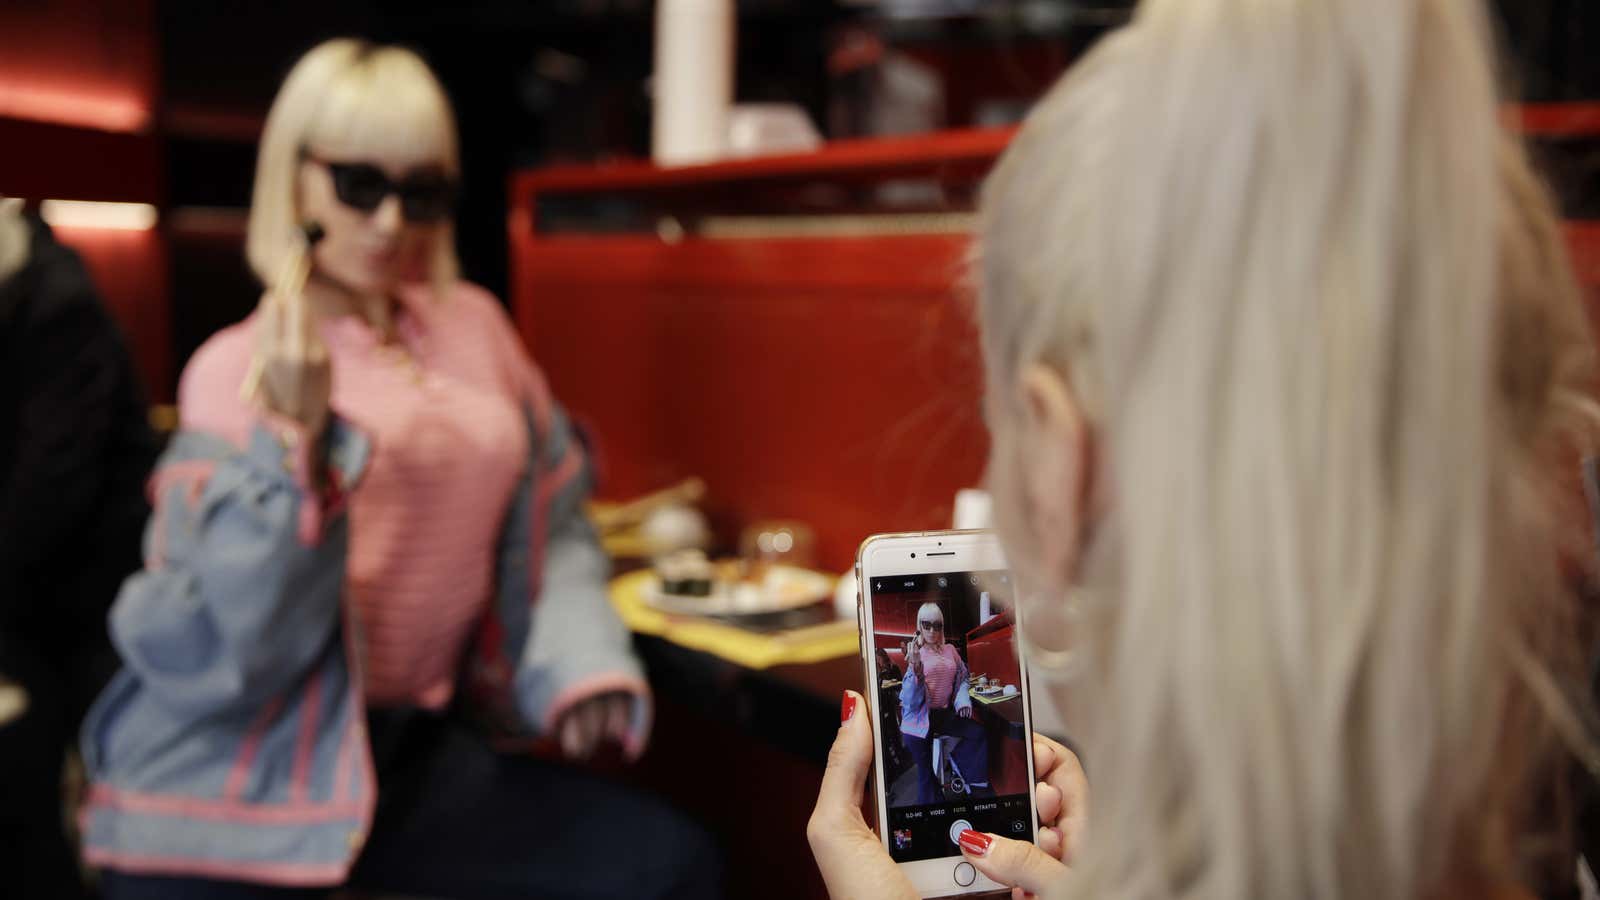 Customer Fashion blogger Clizia Incorvaia, right, takes pictures of her friend singer Vittoria Hyde as they have lunch at the ‘This is not a Sushi…